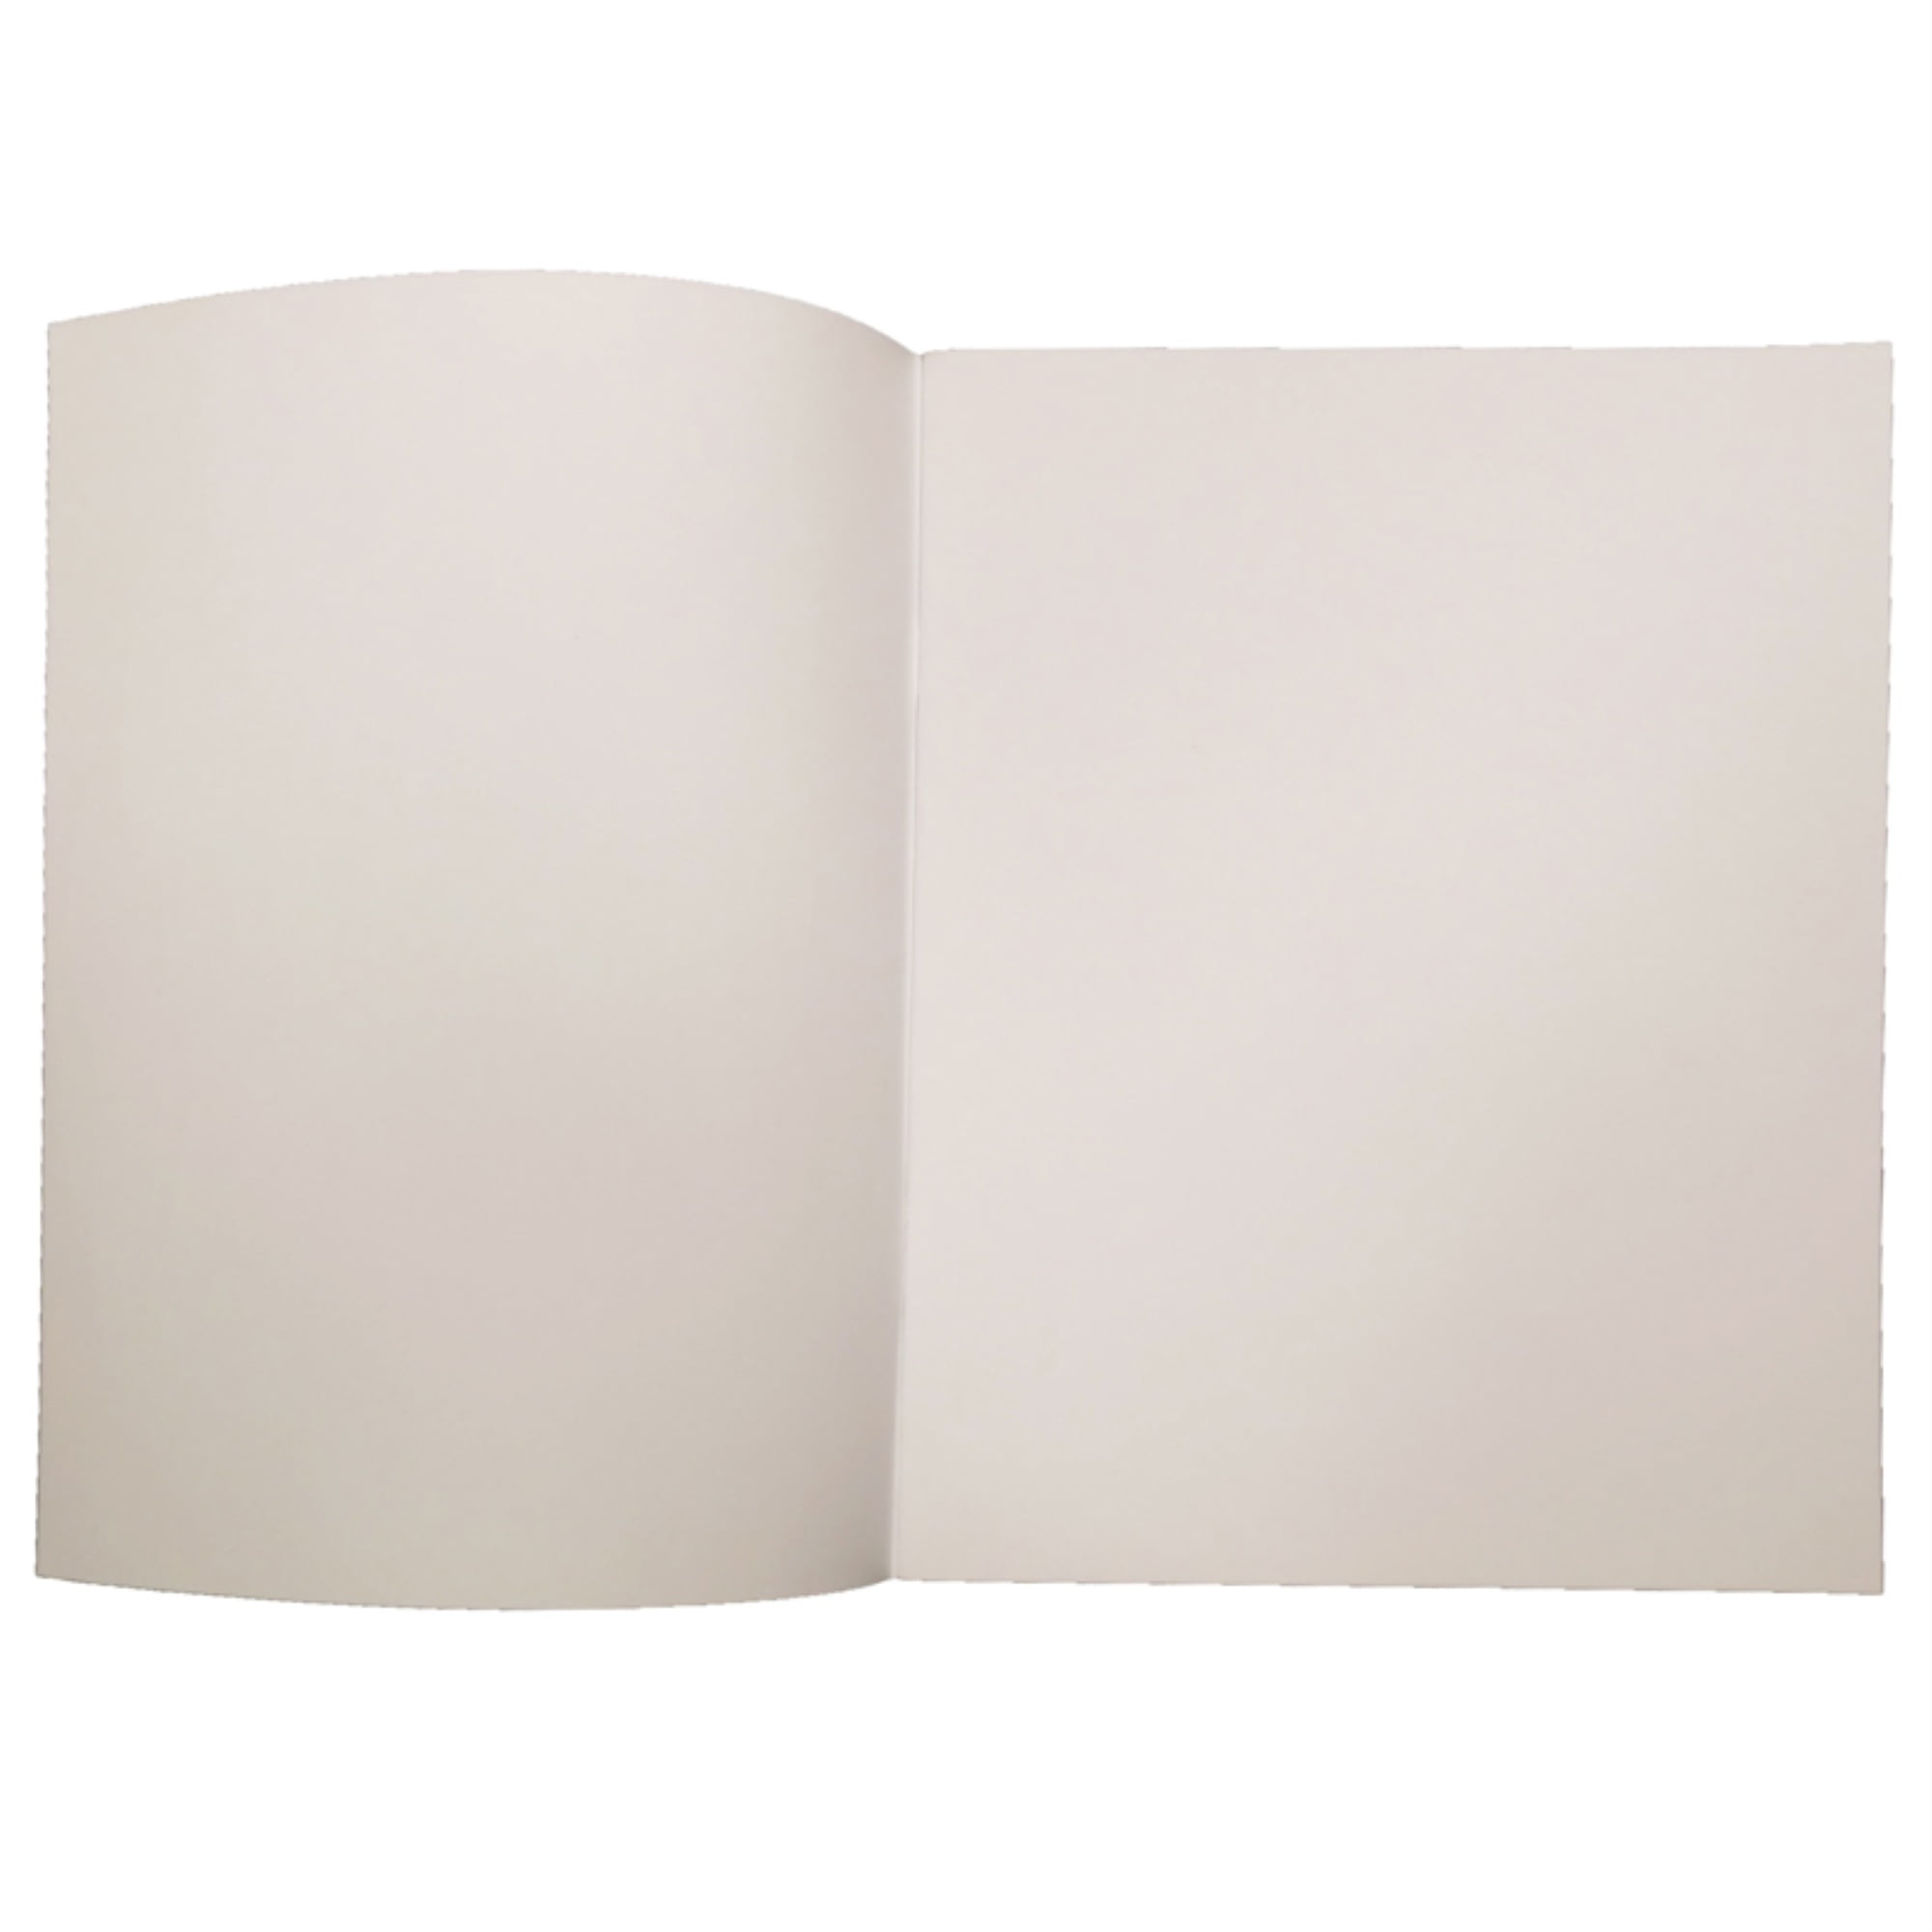 Soft Cover Blank Book, 7 x 8.5 Portrait (12 Pack)